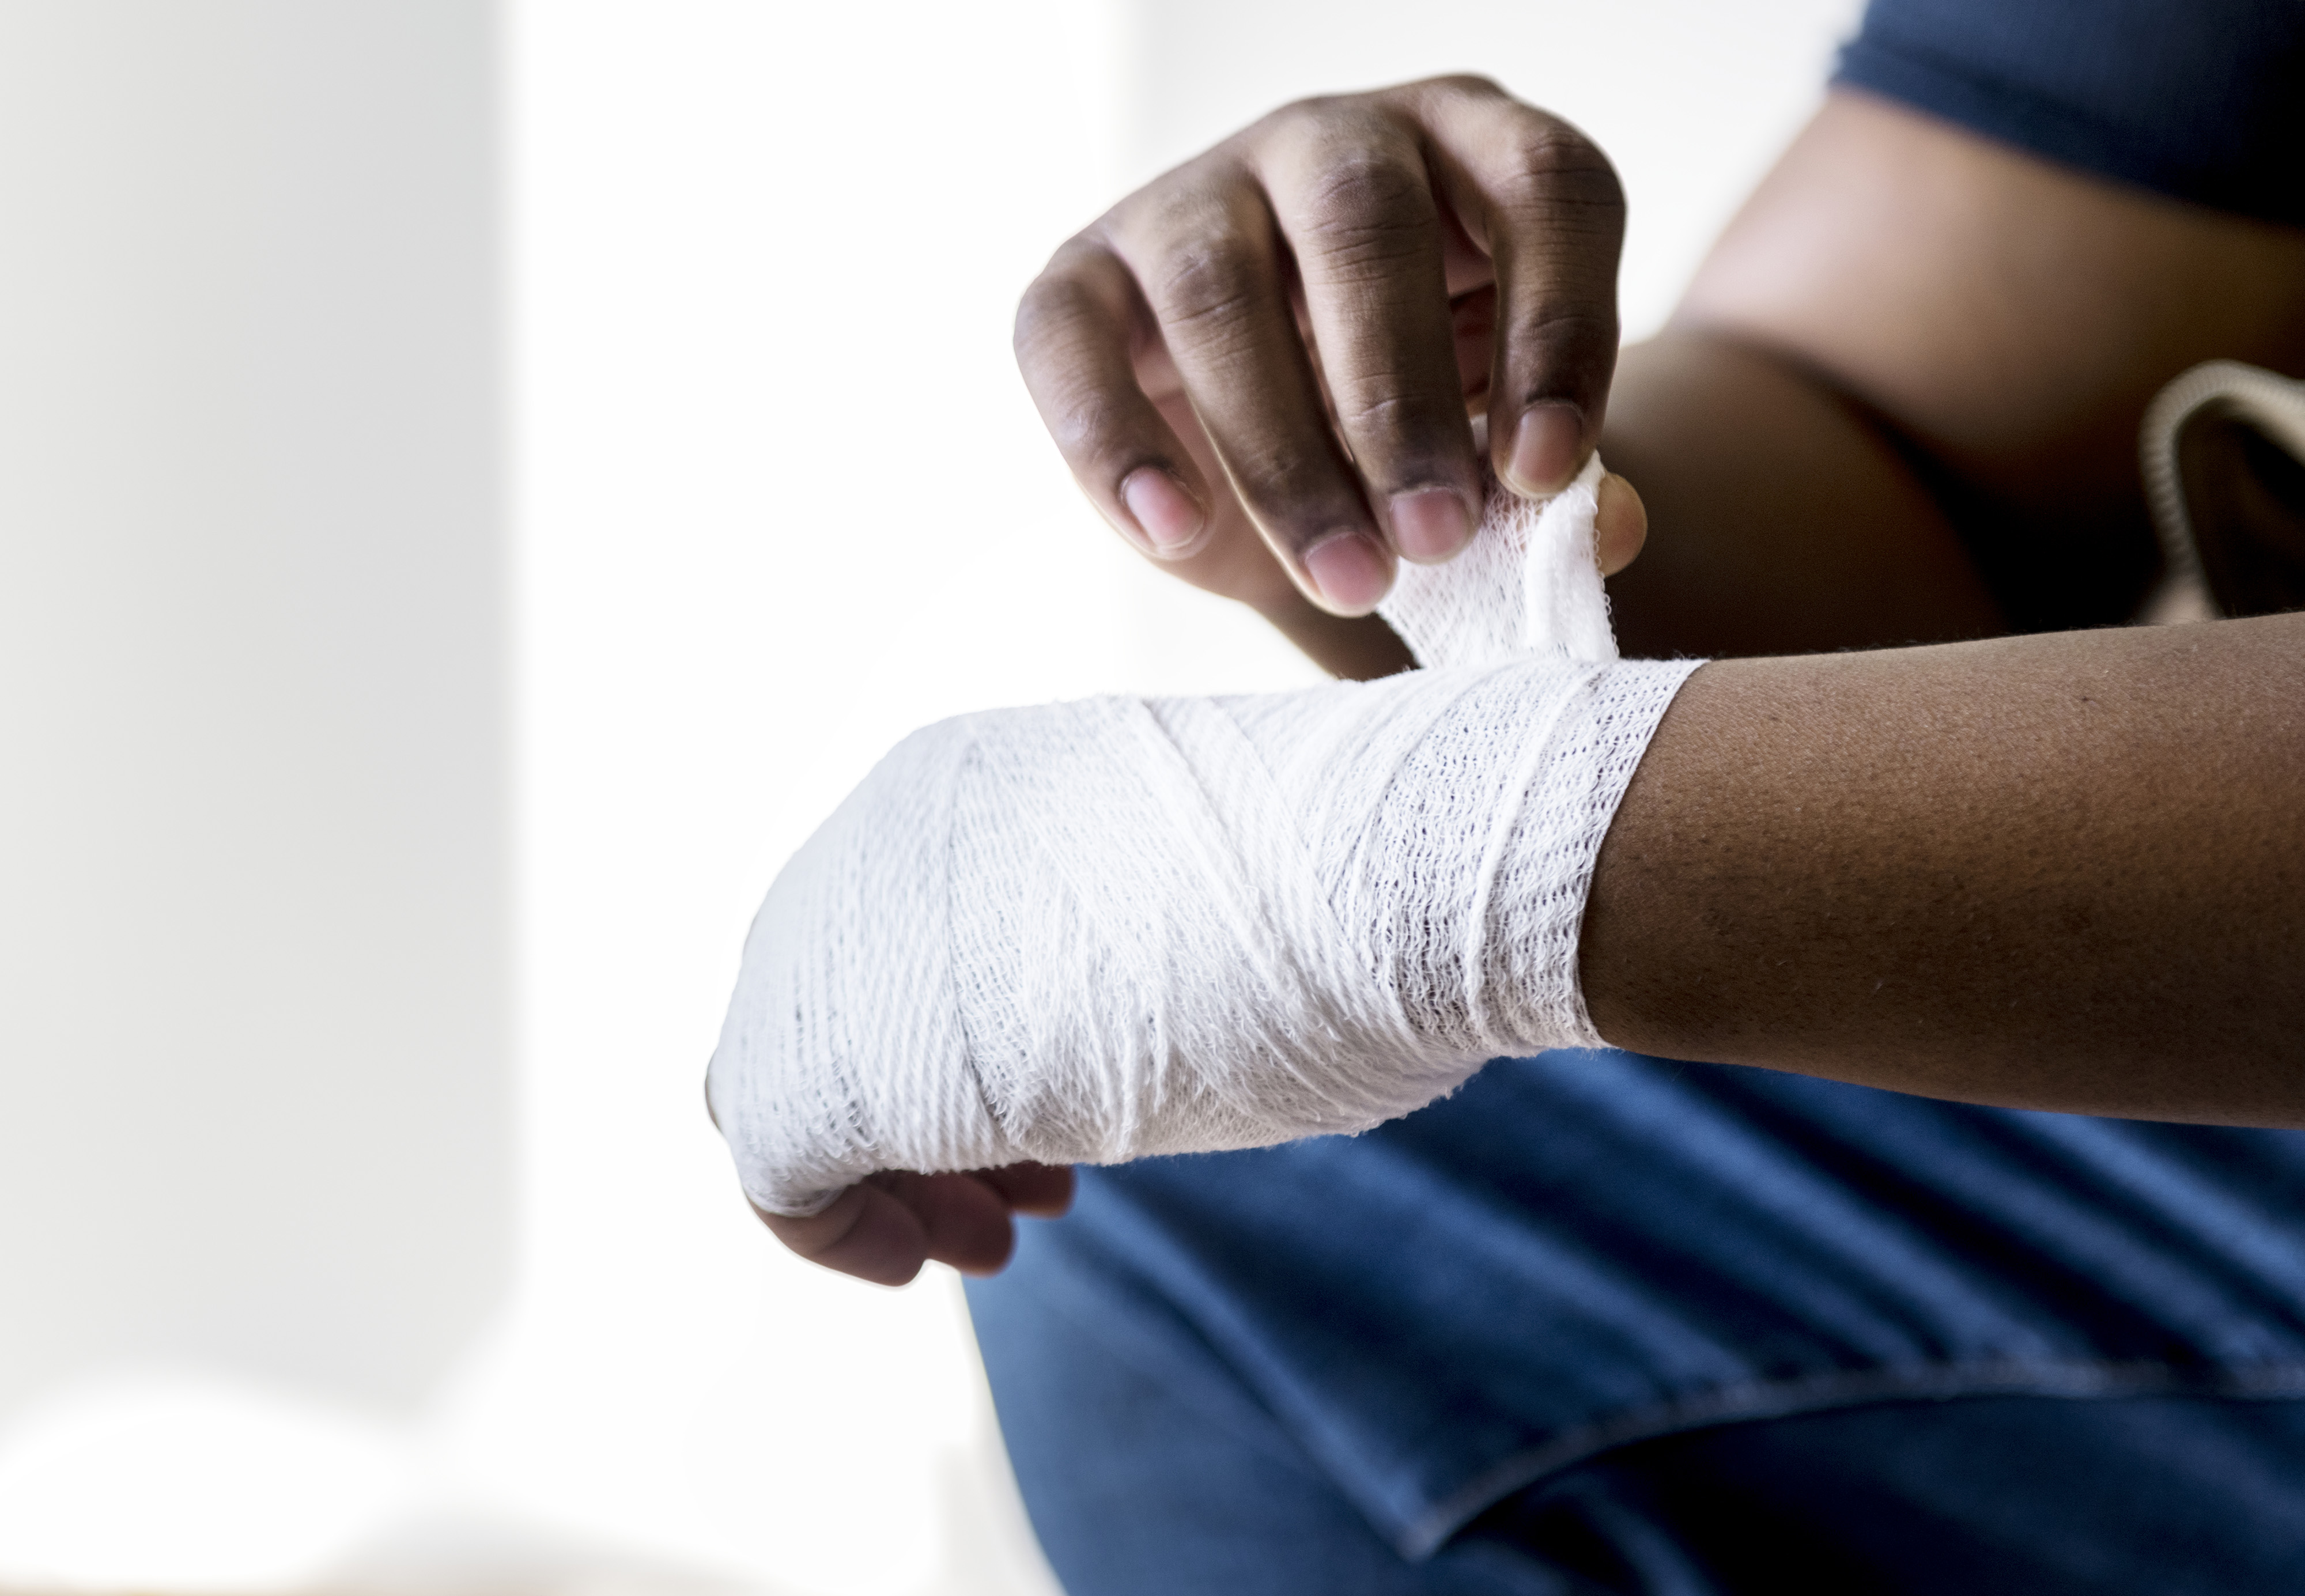 Serious injuries can come with lifelong implications, significant time away from work, difficult recovery process, strained relationships, and other negative effects.